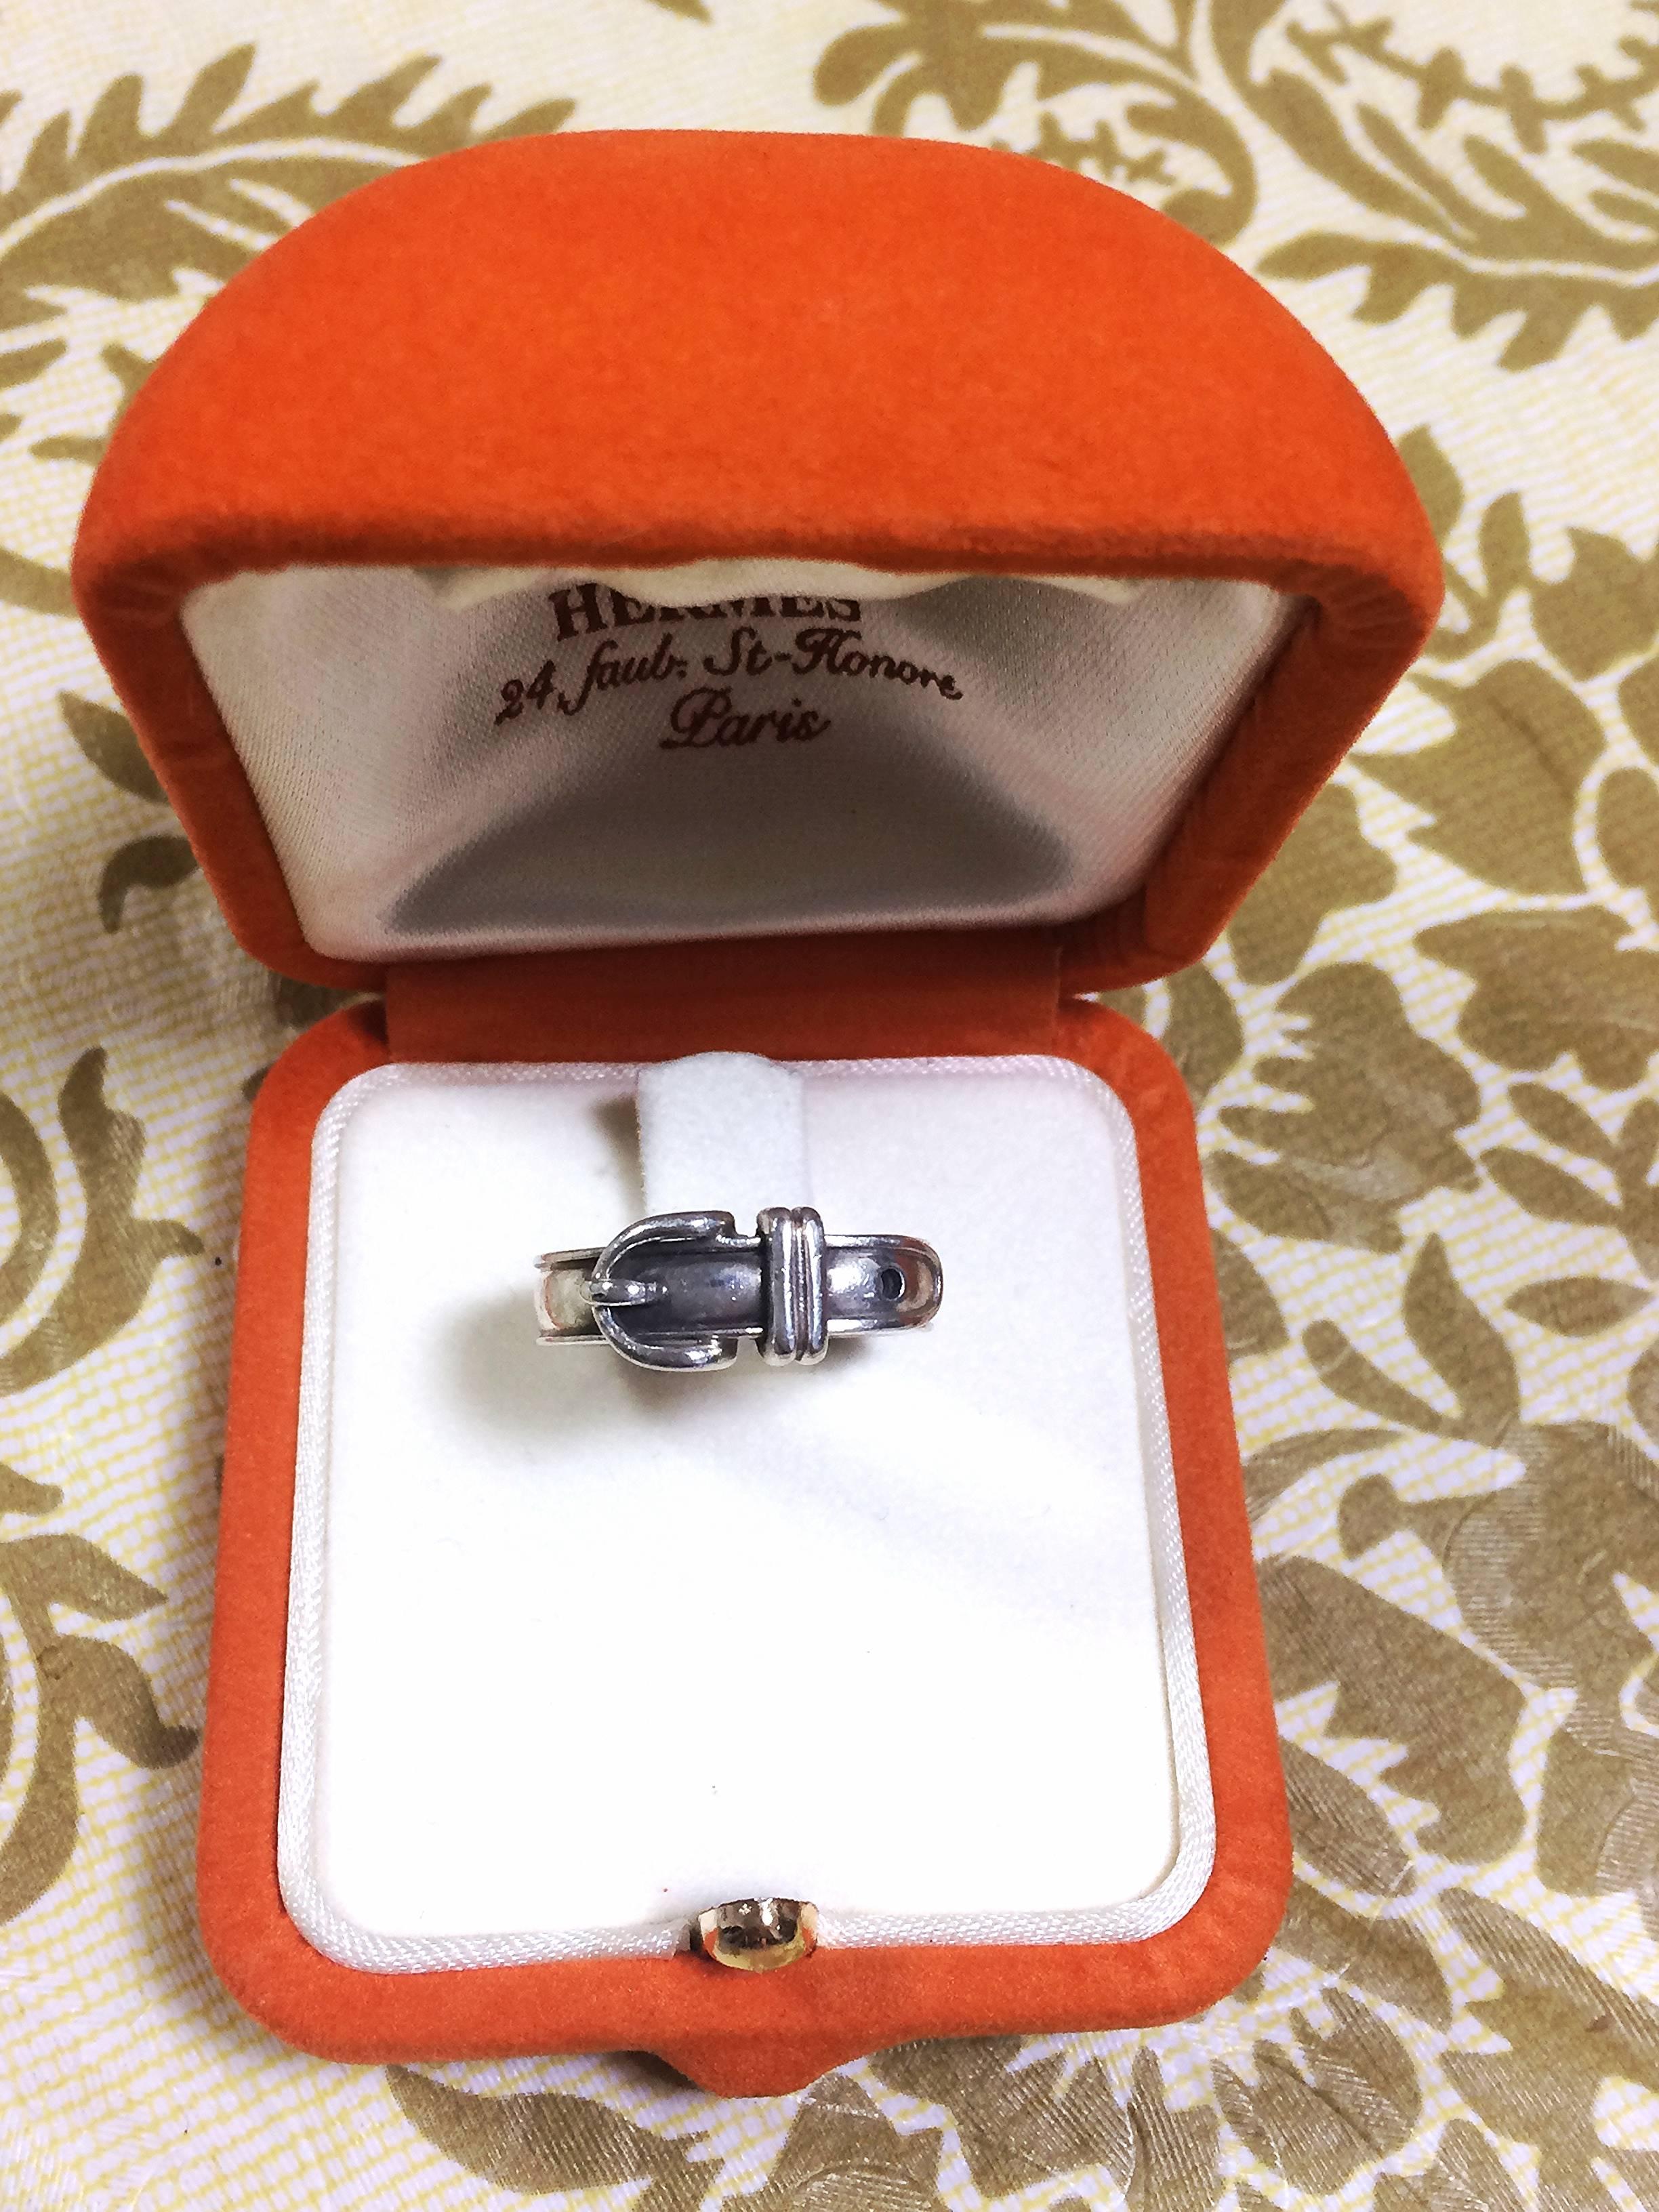 1990s. Vintage Hermes genuine 925 silver ring, classic buckle design with original box and case. size US6.5-7, UK M-N, JP13.

It is about Japanese size 13, so US size is about US6.5-7, and UK size M-N.

Introducing fabulous and classic vintage